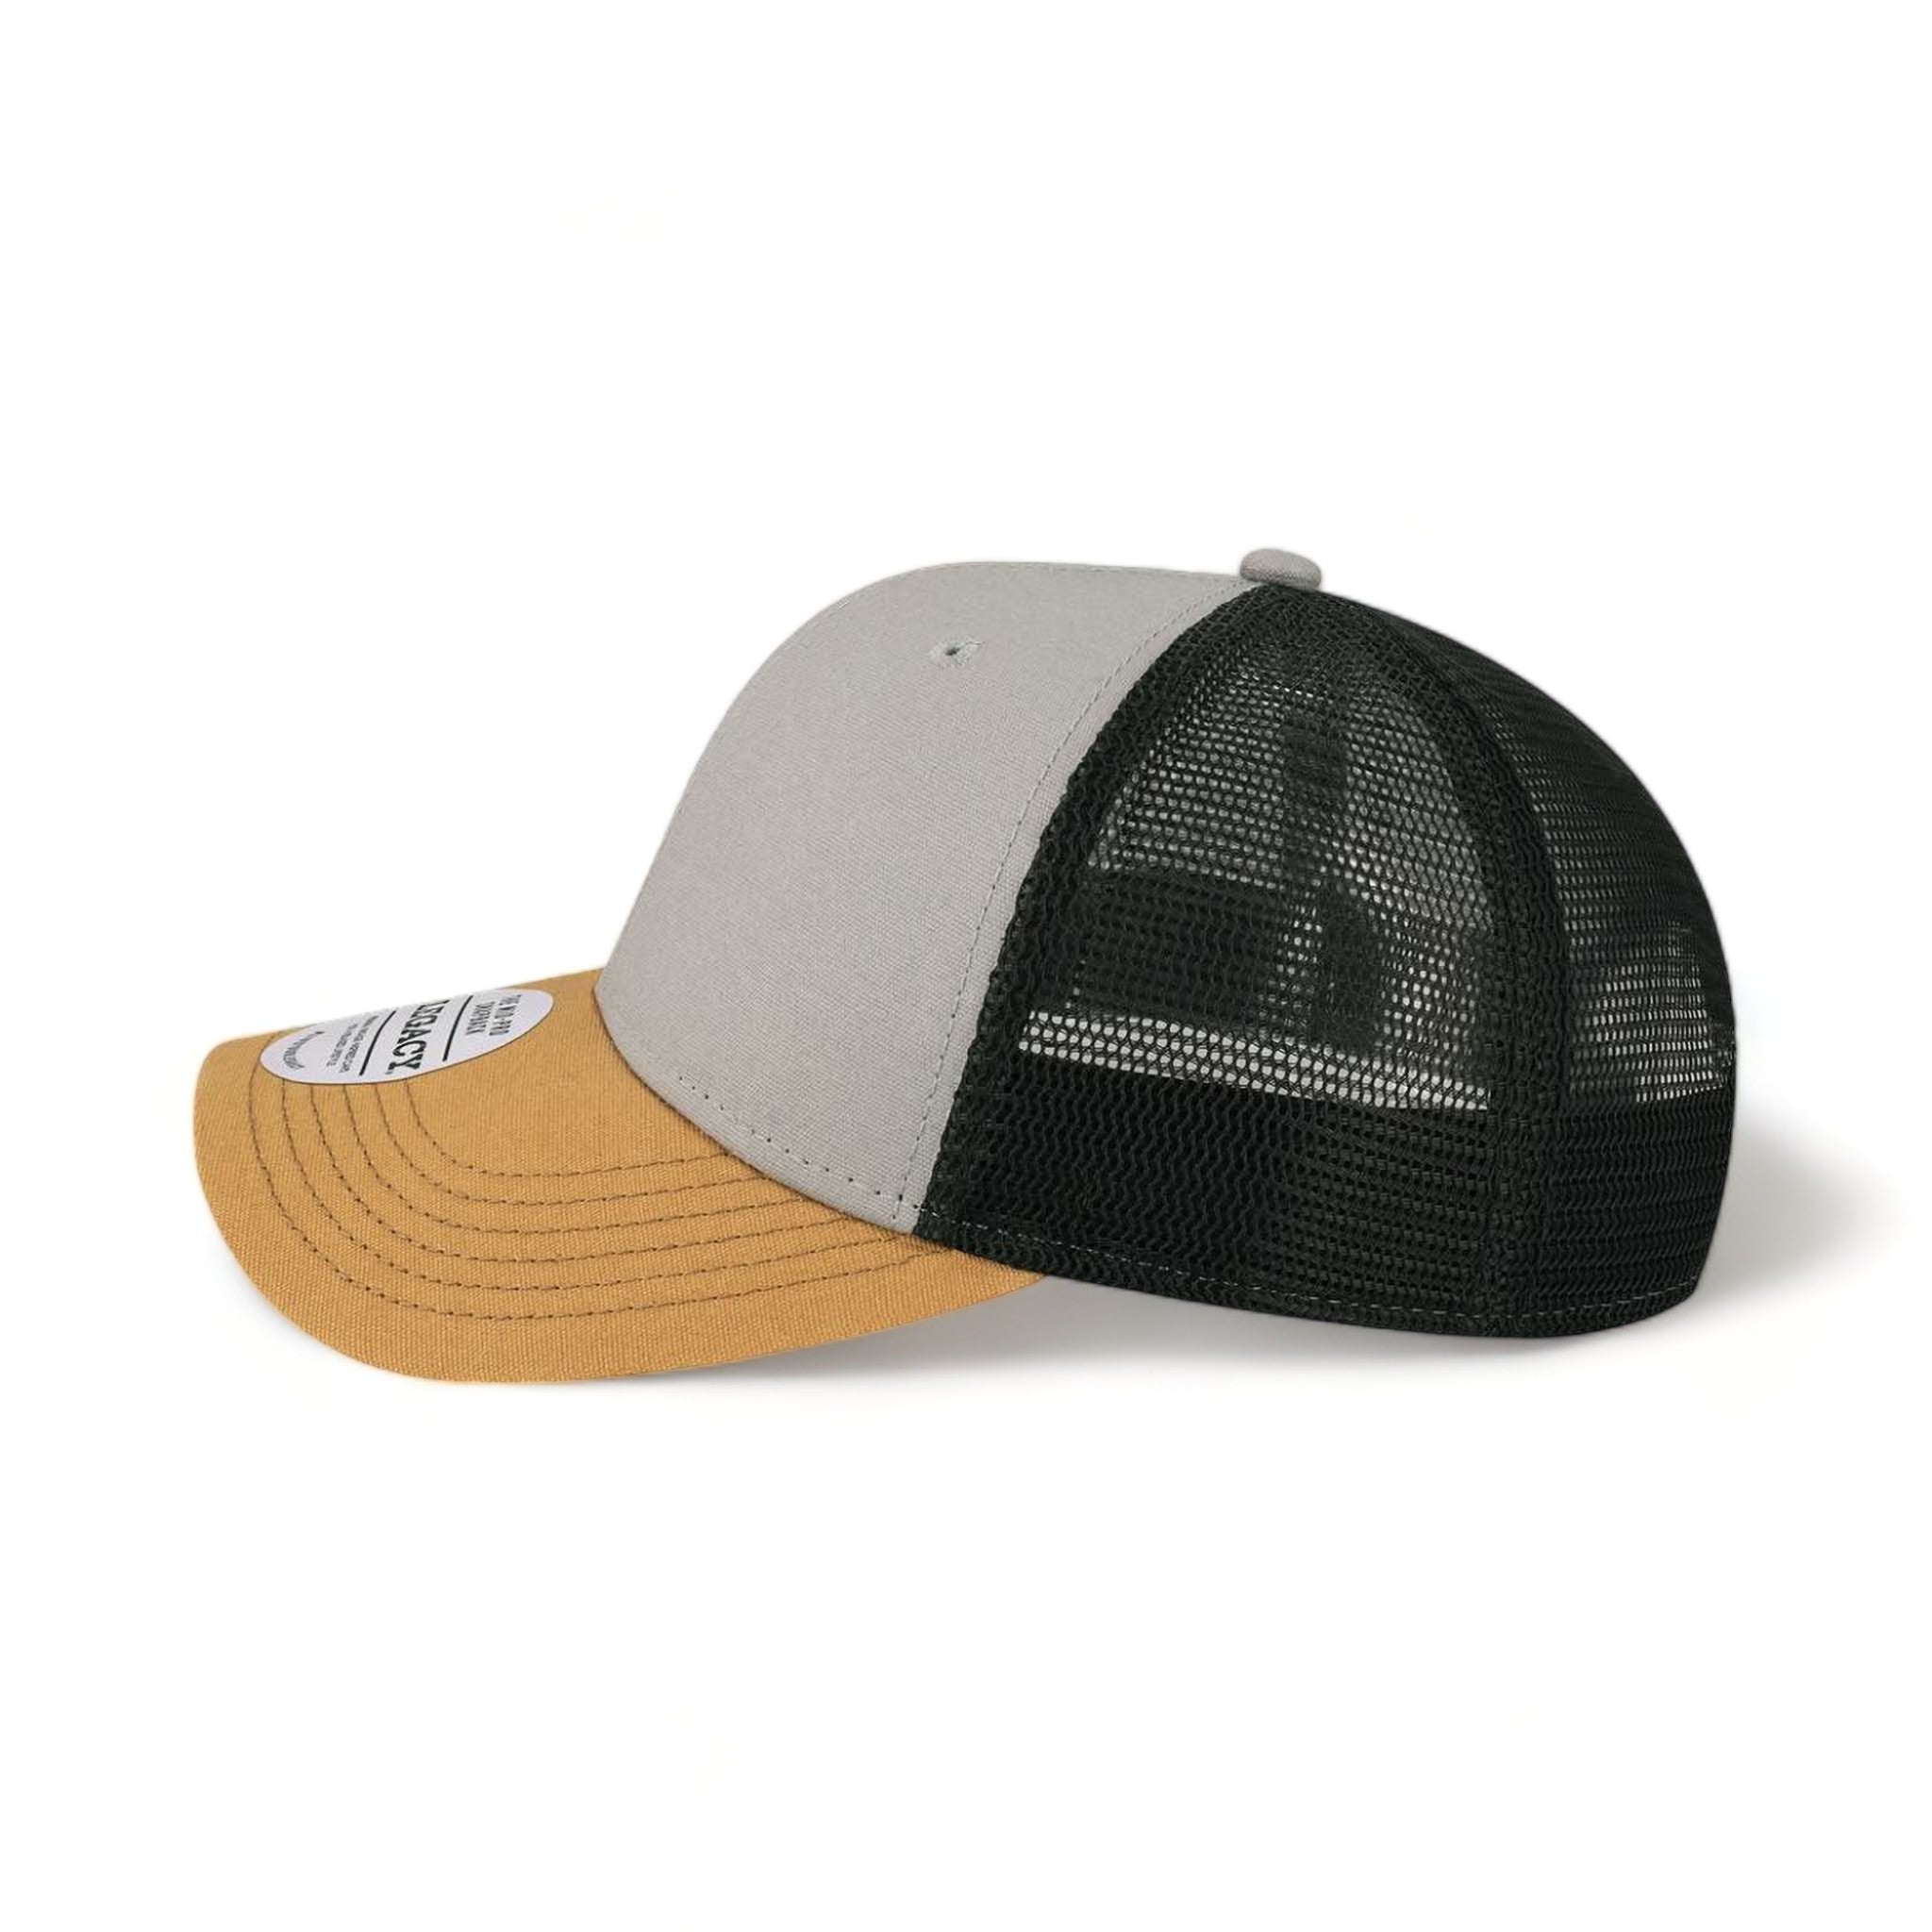 Side view of LEGACY MPS custom hat in grey, caramel and black